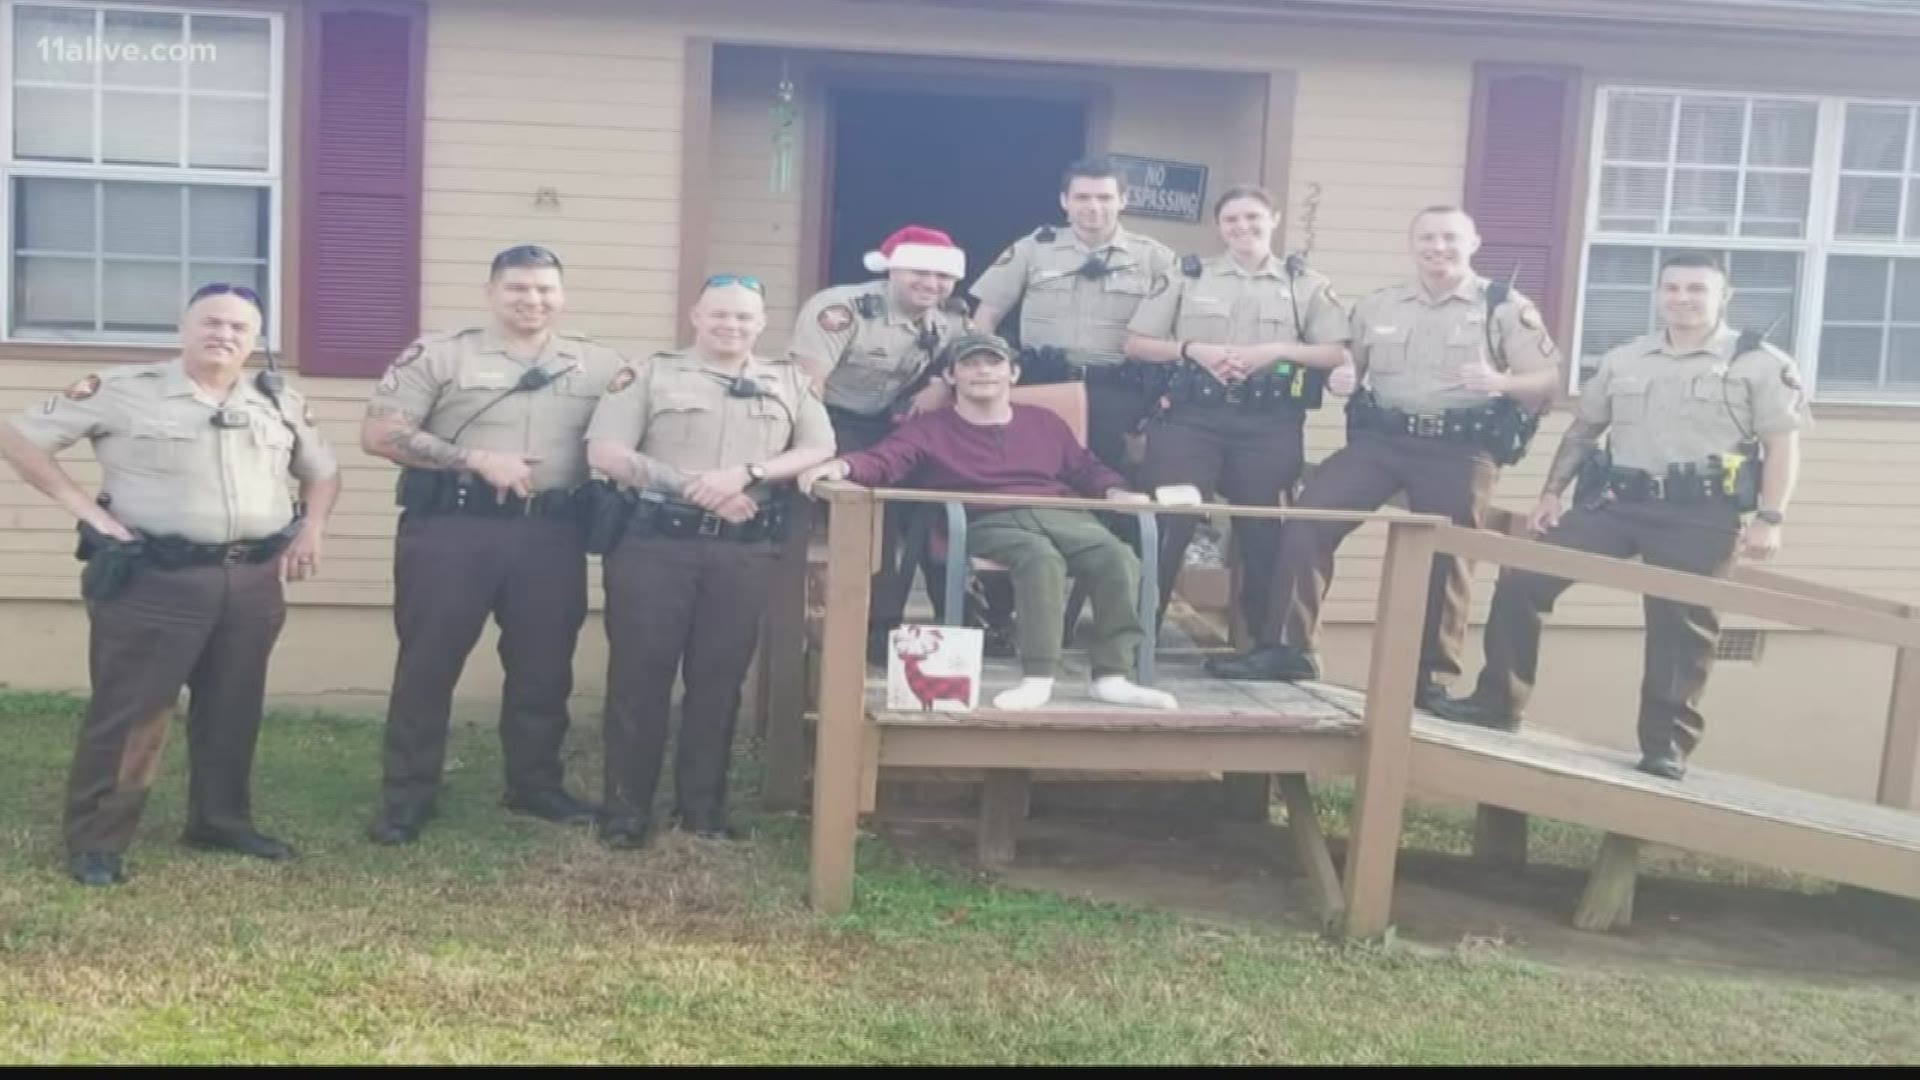 The Walton County Sheriff’s Office made Christmas very special for an honorary sergeant battling cancer when they decided to pay a surprise visit.